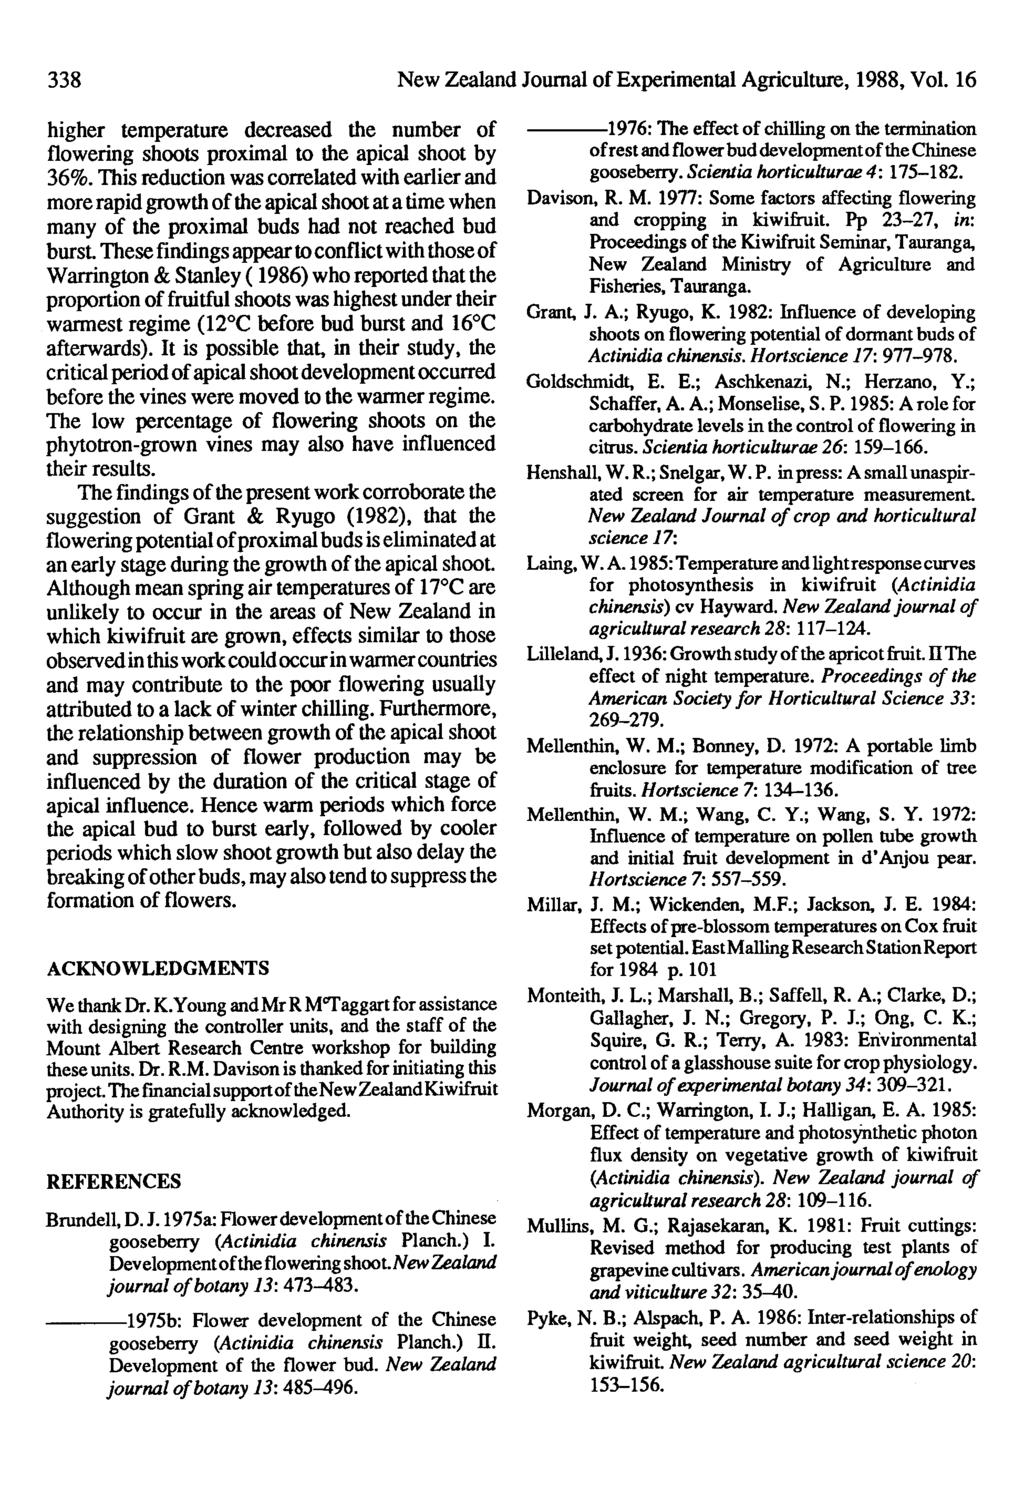 338 New Zealand Journal of Experimental Agriculture, 1988, Vol. 16 higher temperature decreased the number of flowering shoots proximal to the apical shoot by 36%.